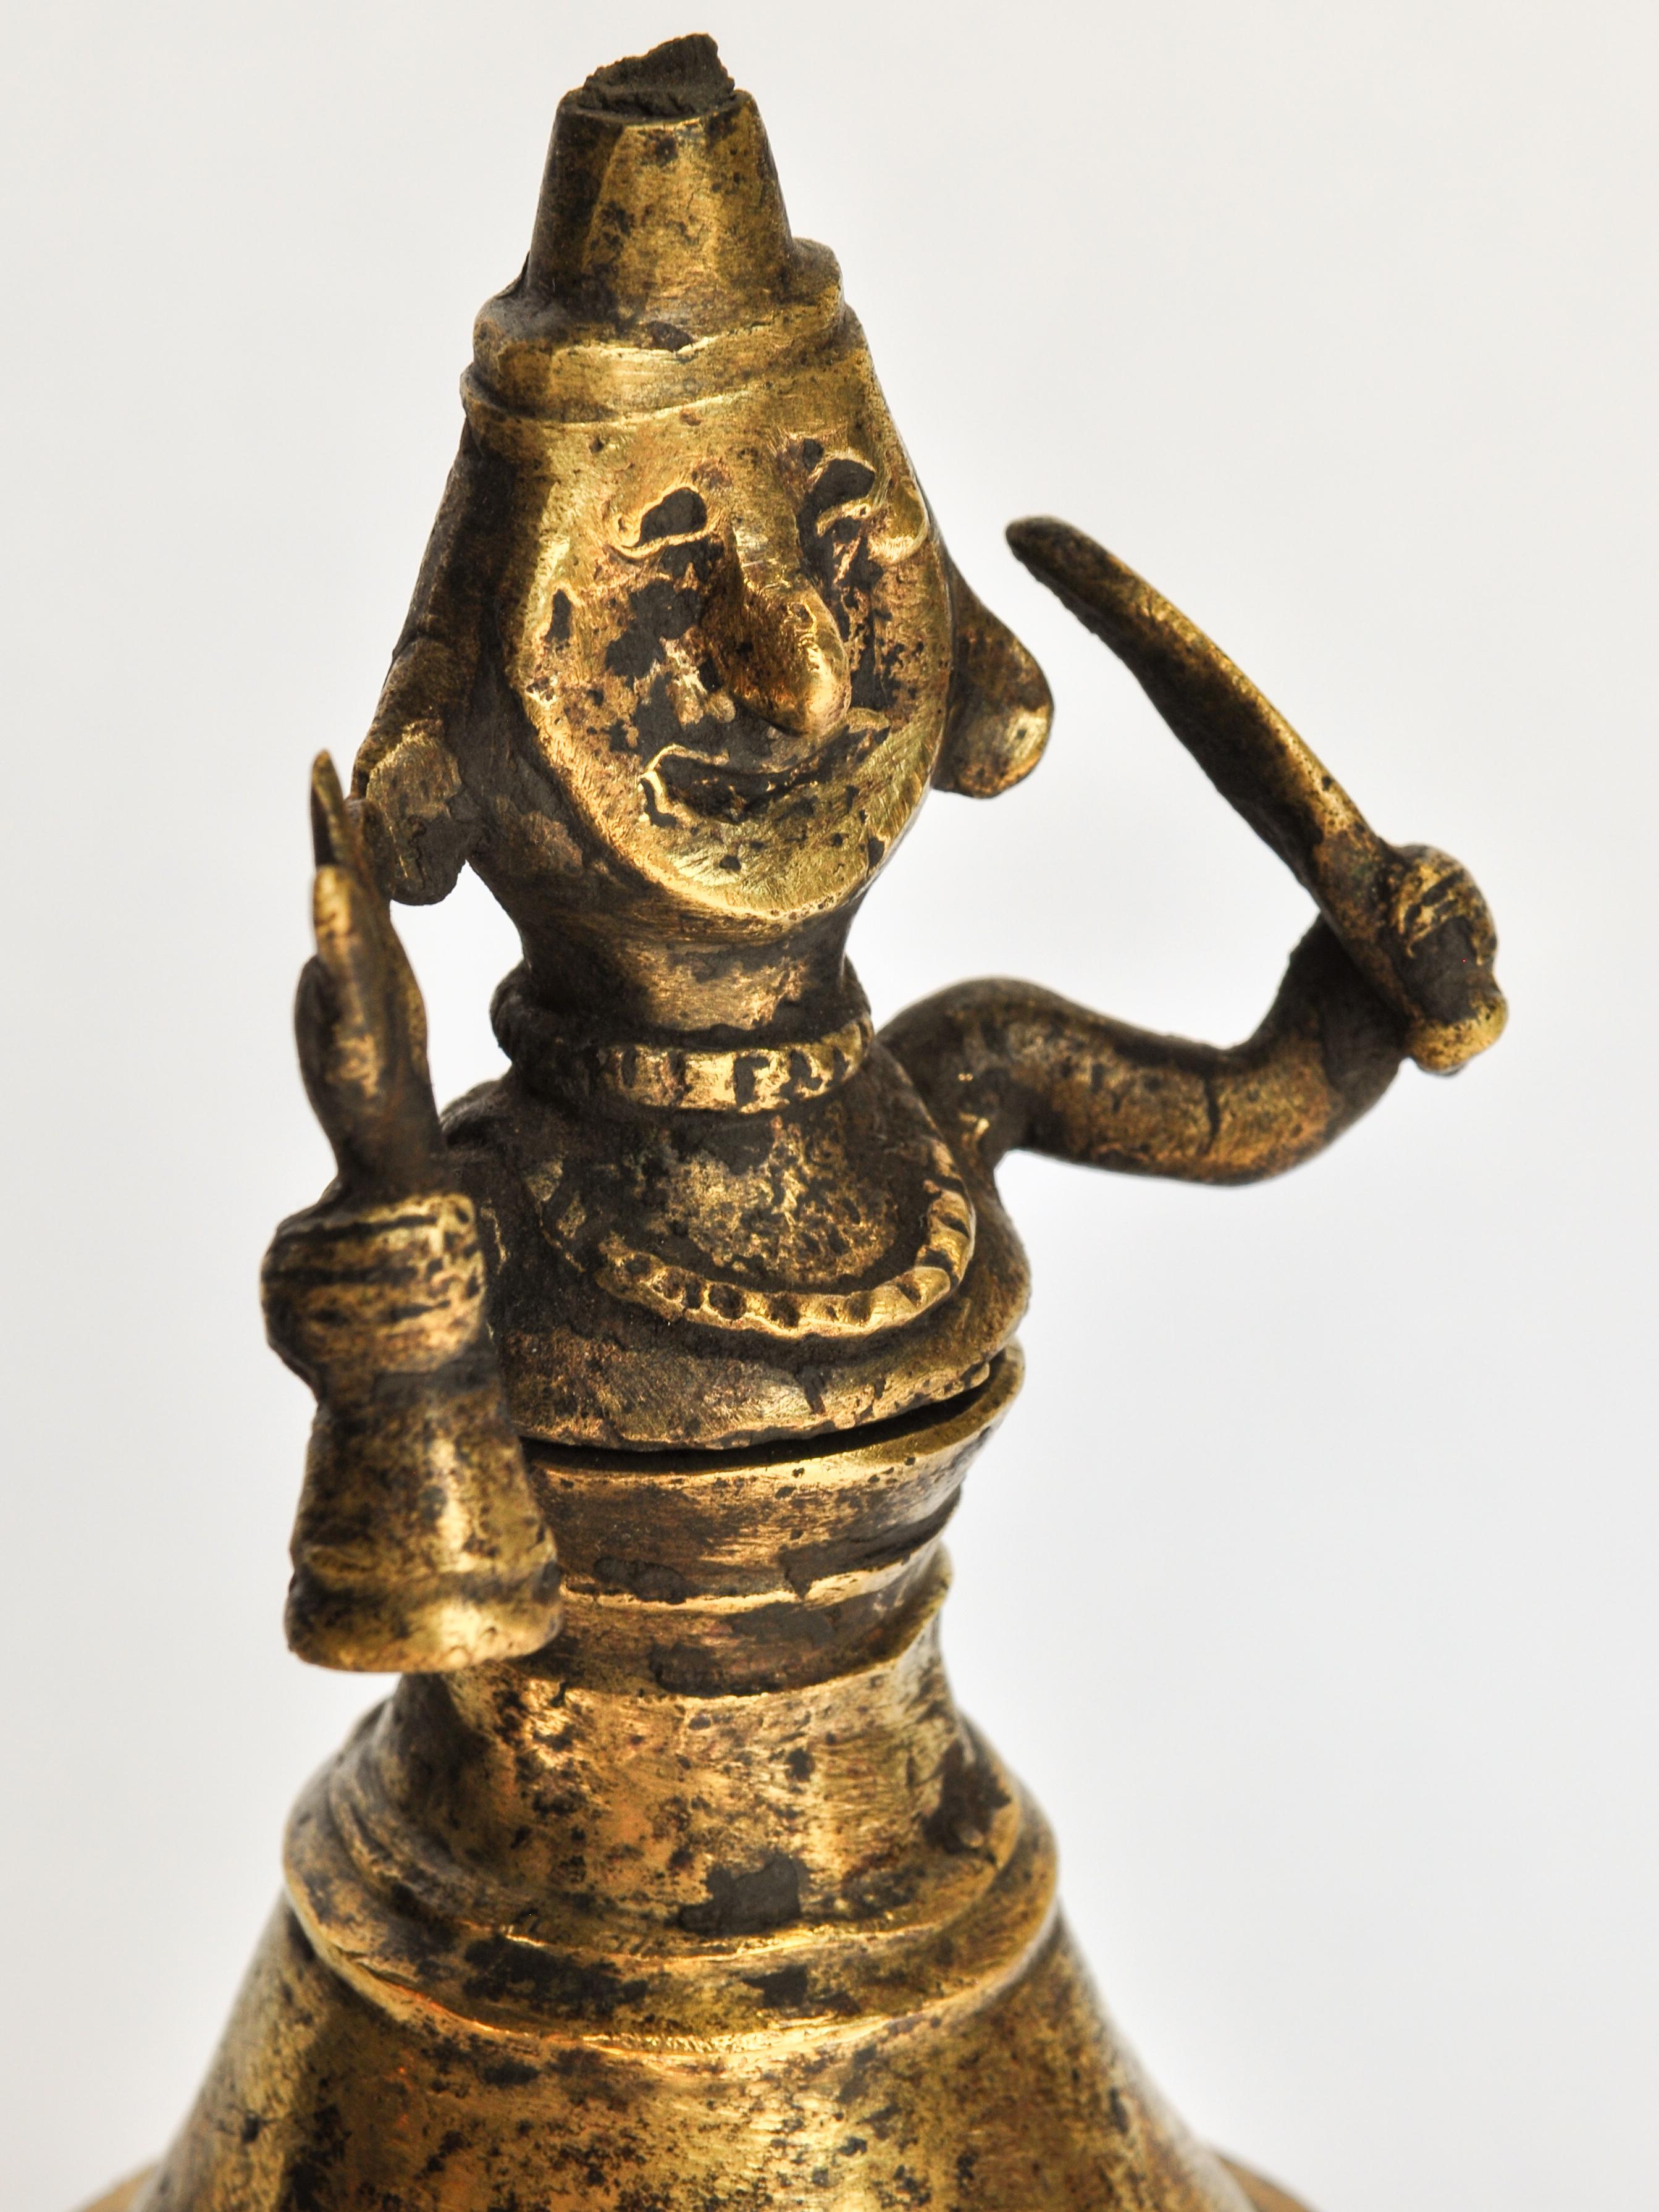 Nepalese Vintage Bronze Oil Lamp with Shaman Figure from West Nepal, Mid-20th Century